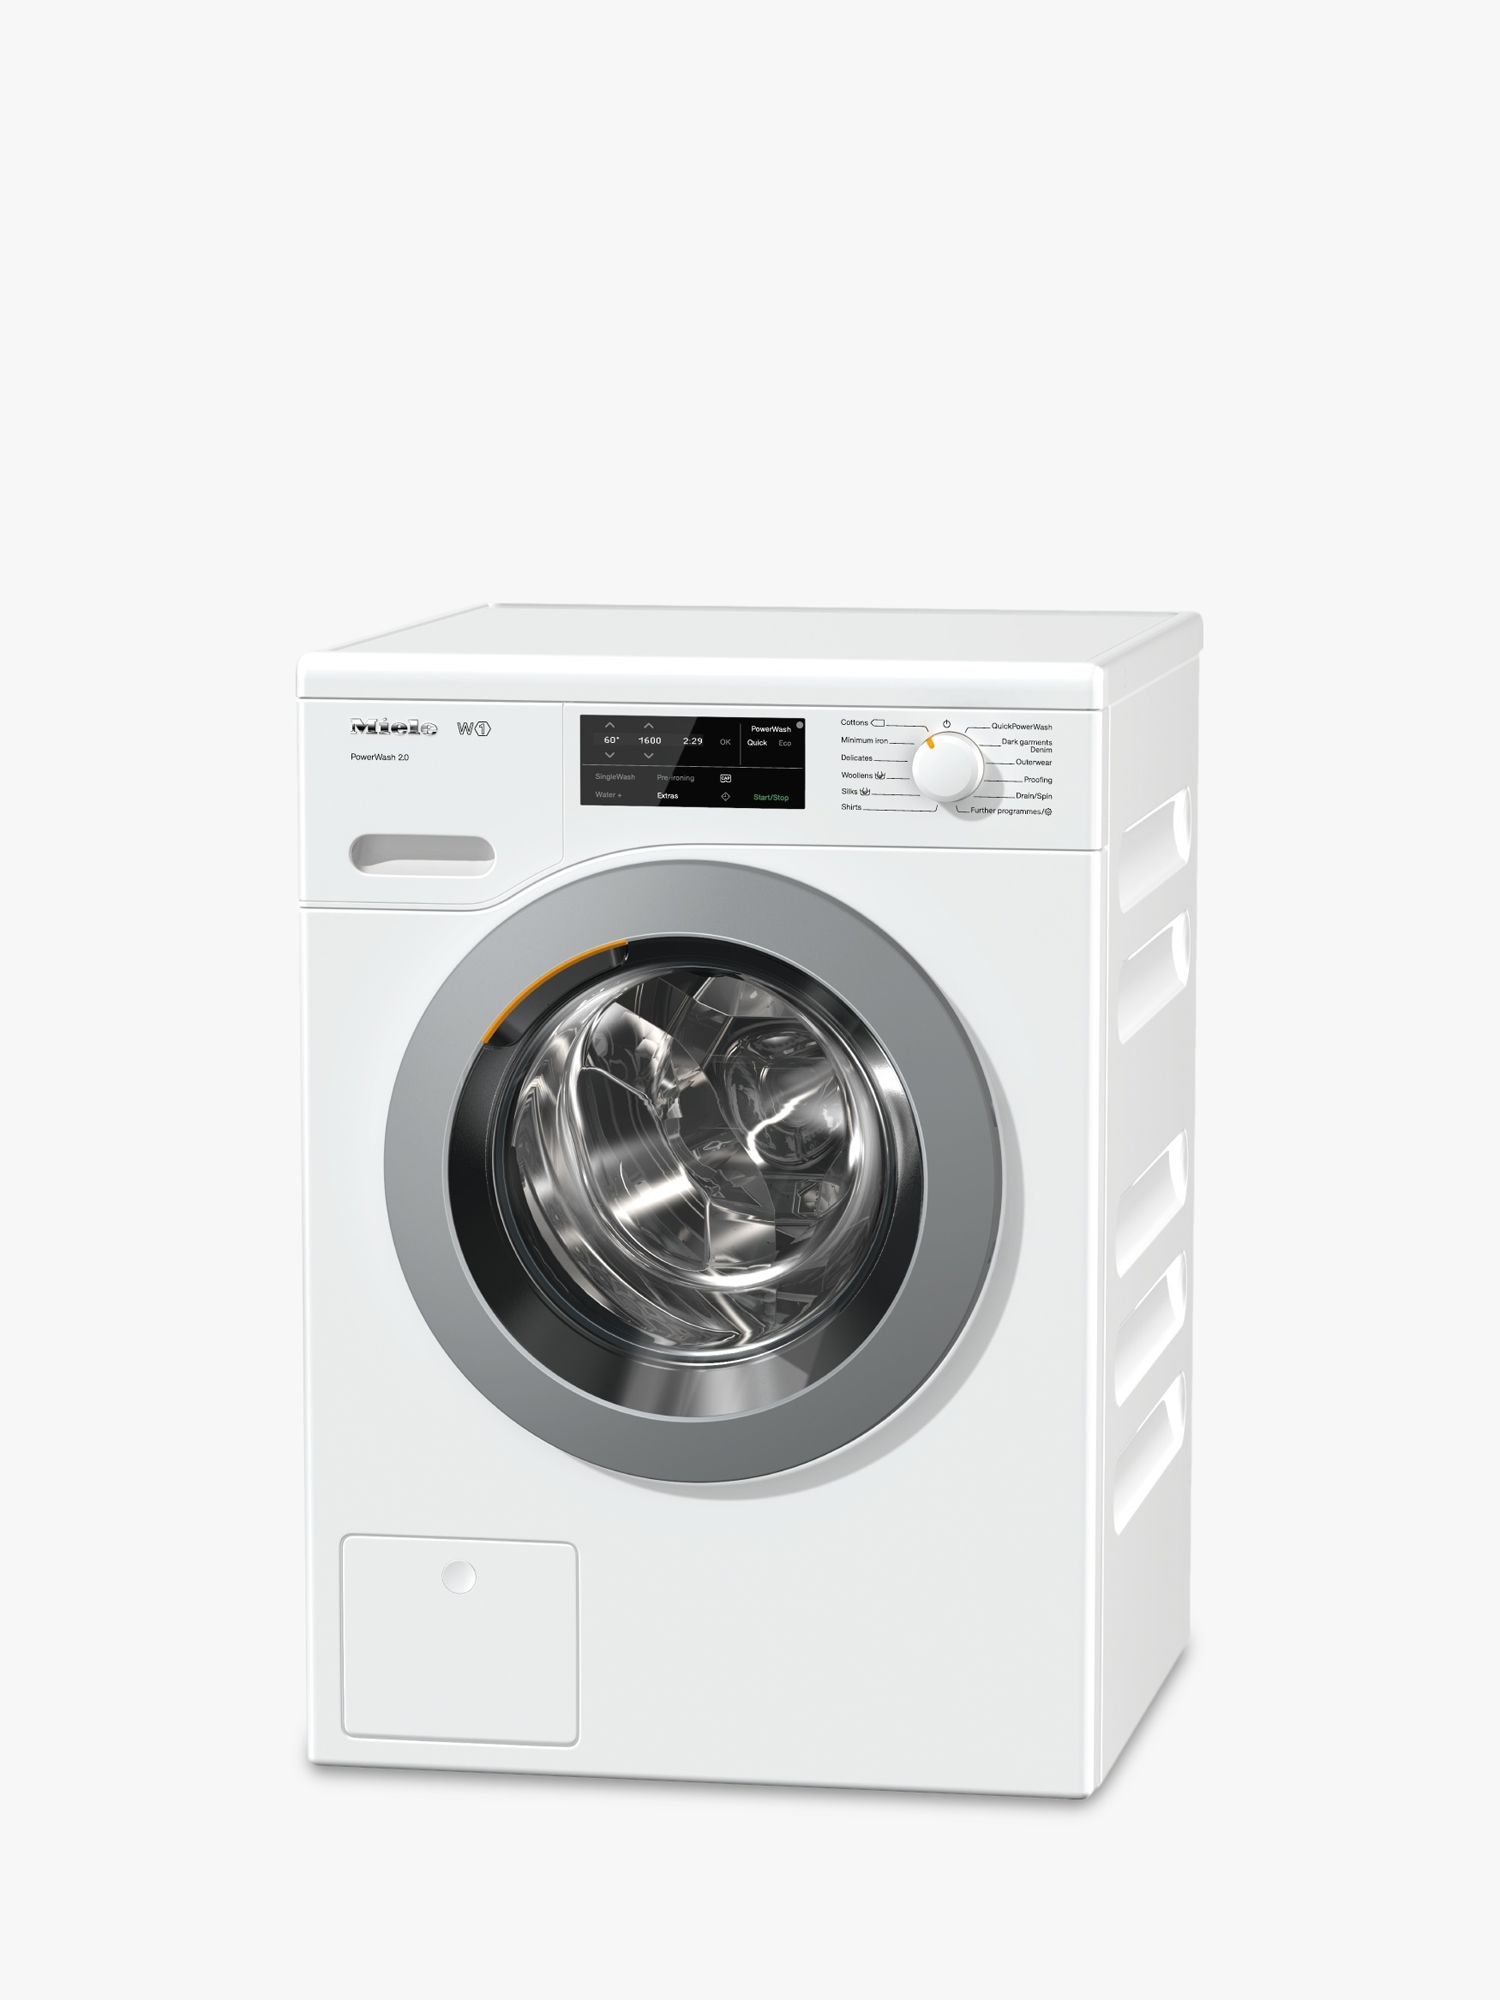 Miele WCE320 Quick PowerWash Freestanding Washing Machine, 8kg Load, A+++ Energy Rating, 1400rpm Spin, White